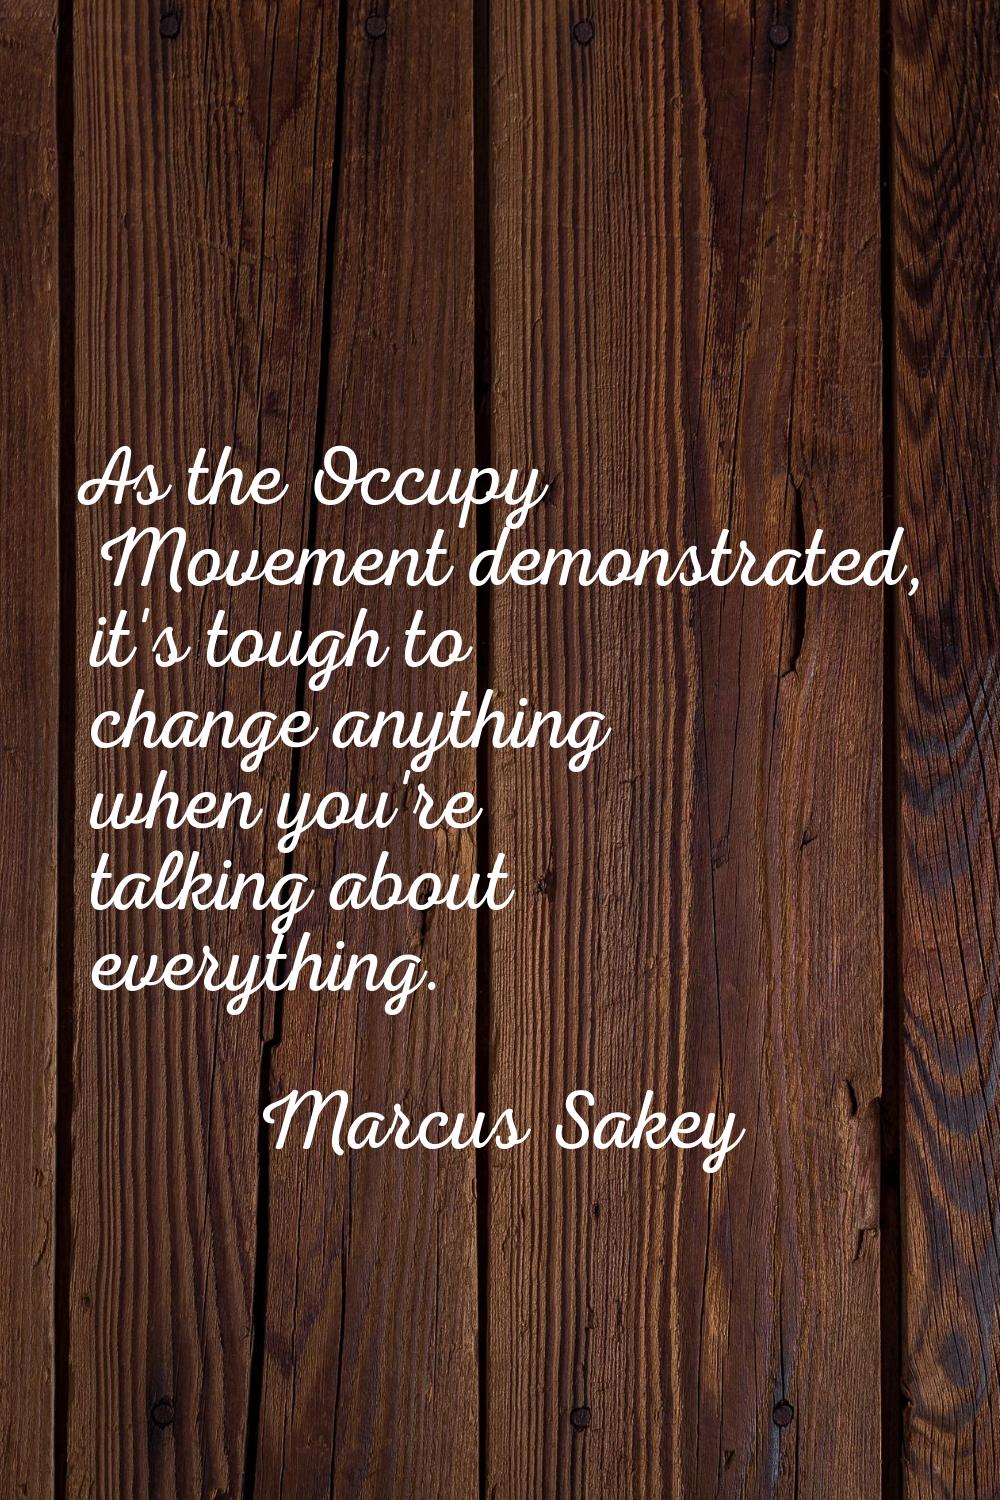 As the Occupy Movement demonstrated, it's tough to change anything when you're talking about everyt